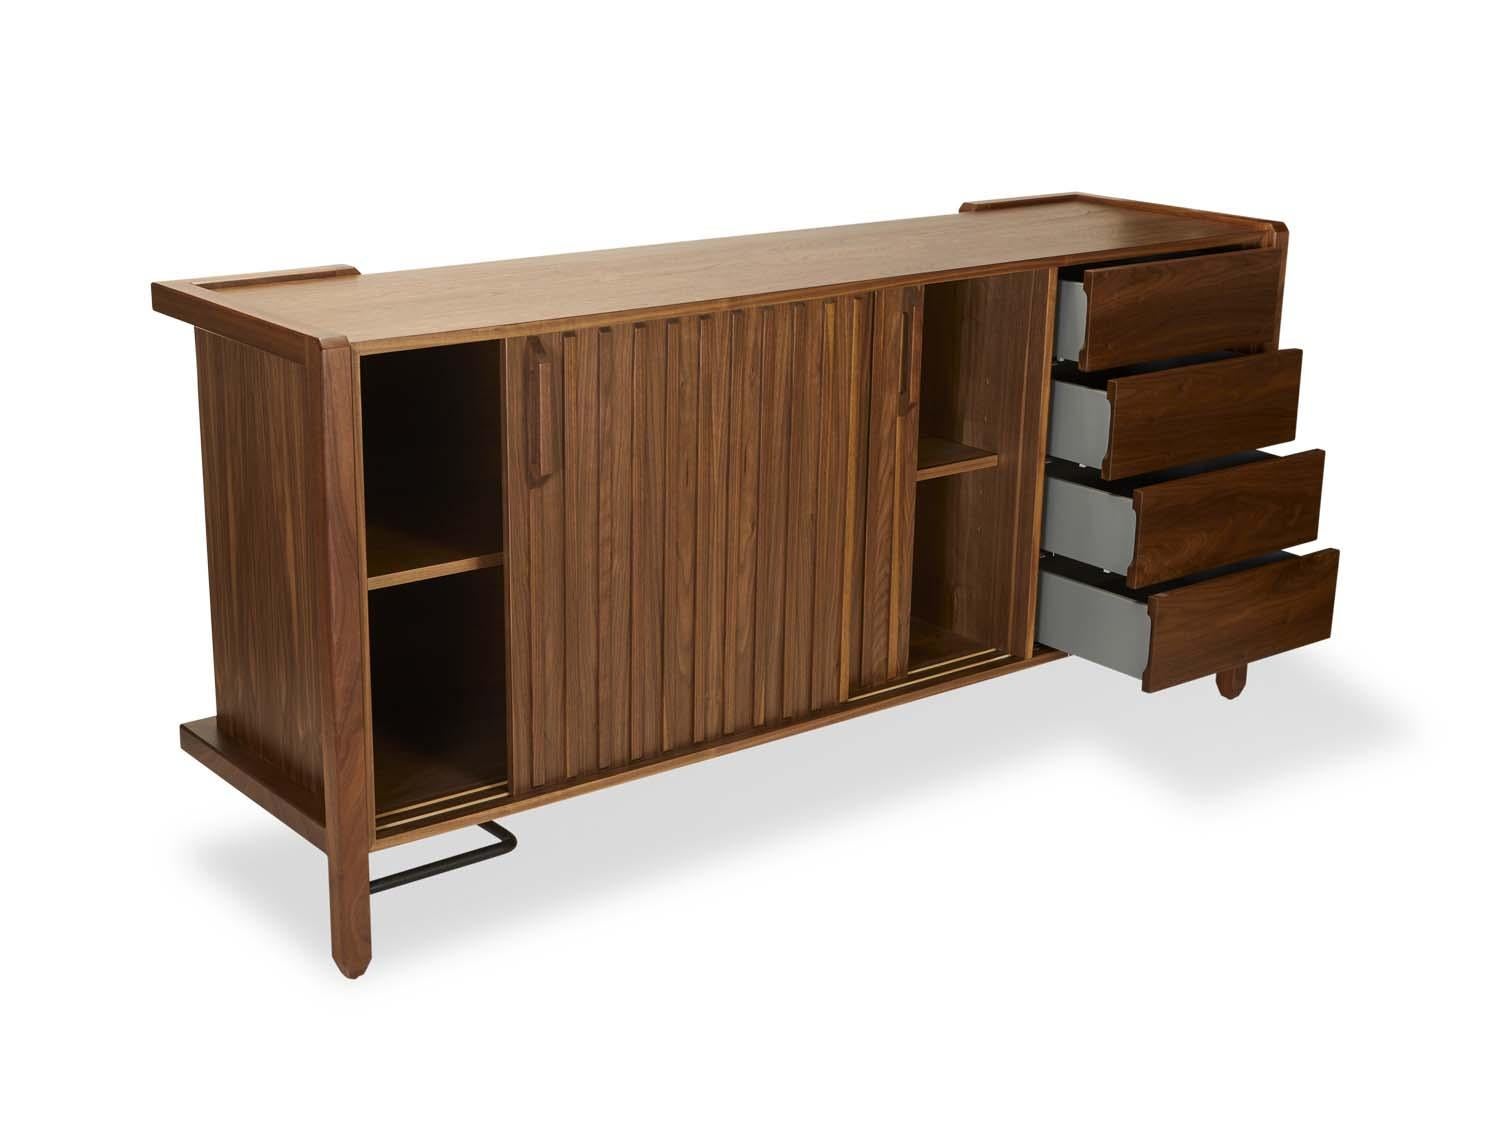 Walnut Ojai Credenza by Lawson-Fenning. The Ojai credenza has four drawers and two bypass doors with open storage behind it. It has solid white oak or American walnut legs and case, and features a metal stretcher on the base.

The Lawson-Fenning